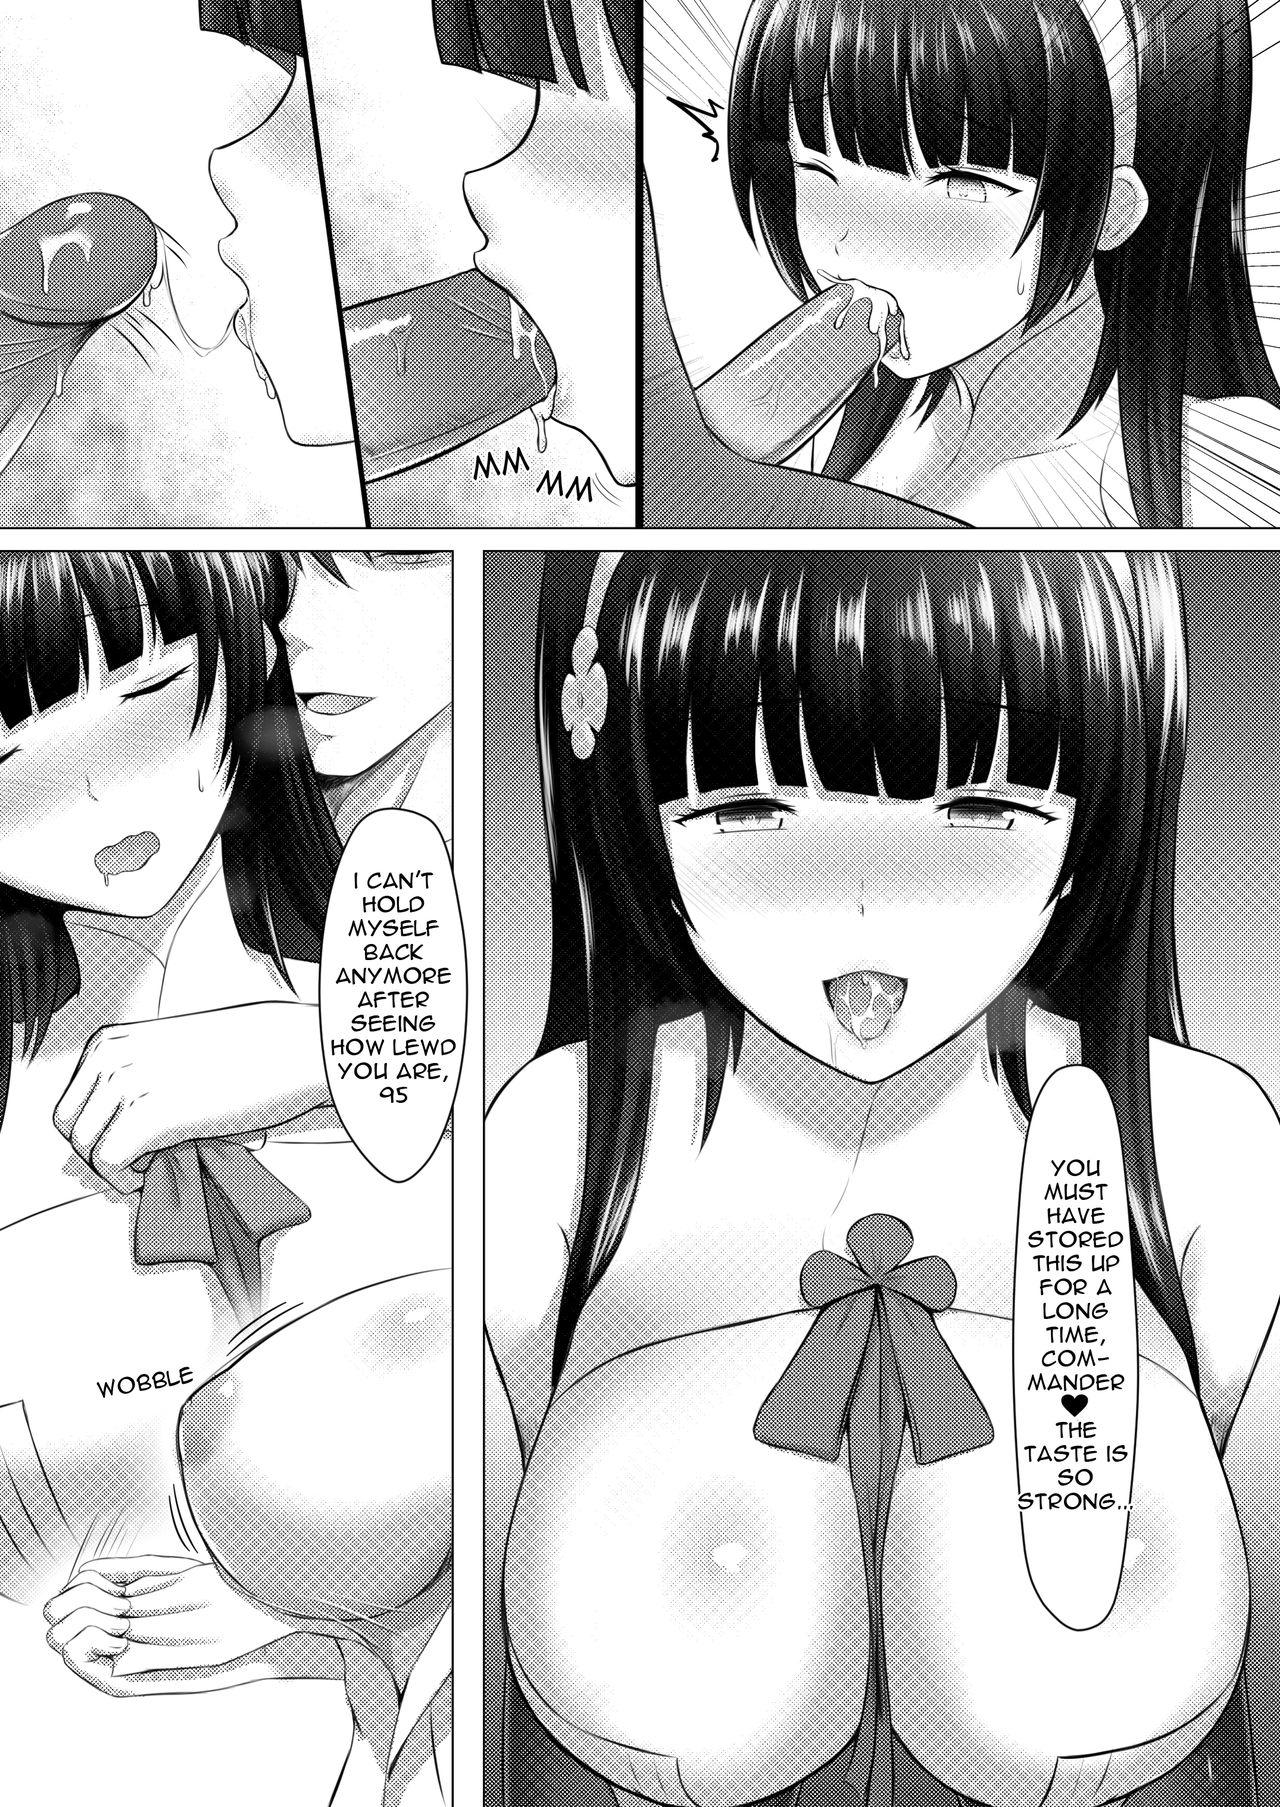 Defloration A Lovely Flower's Gift - Girls frontline Com - Page 10